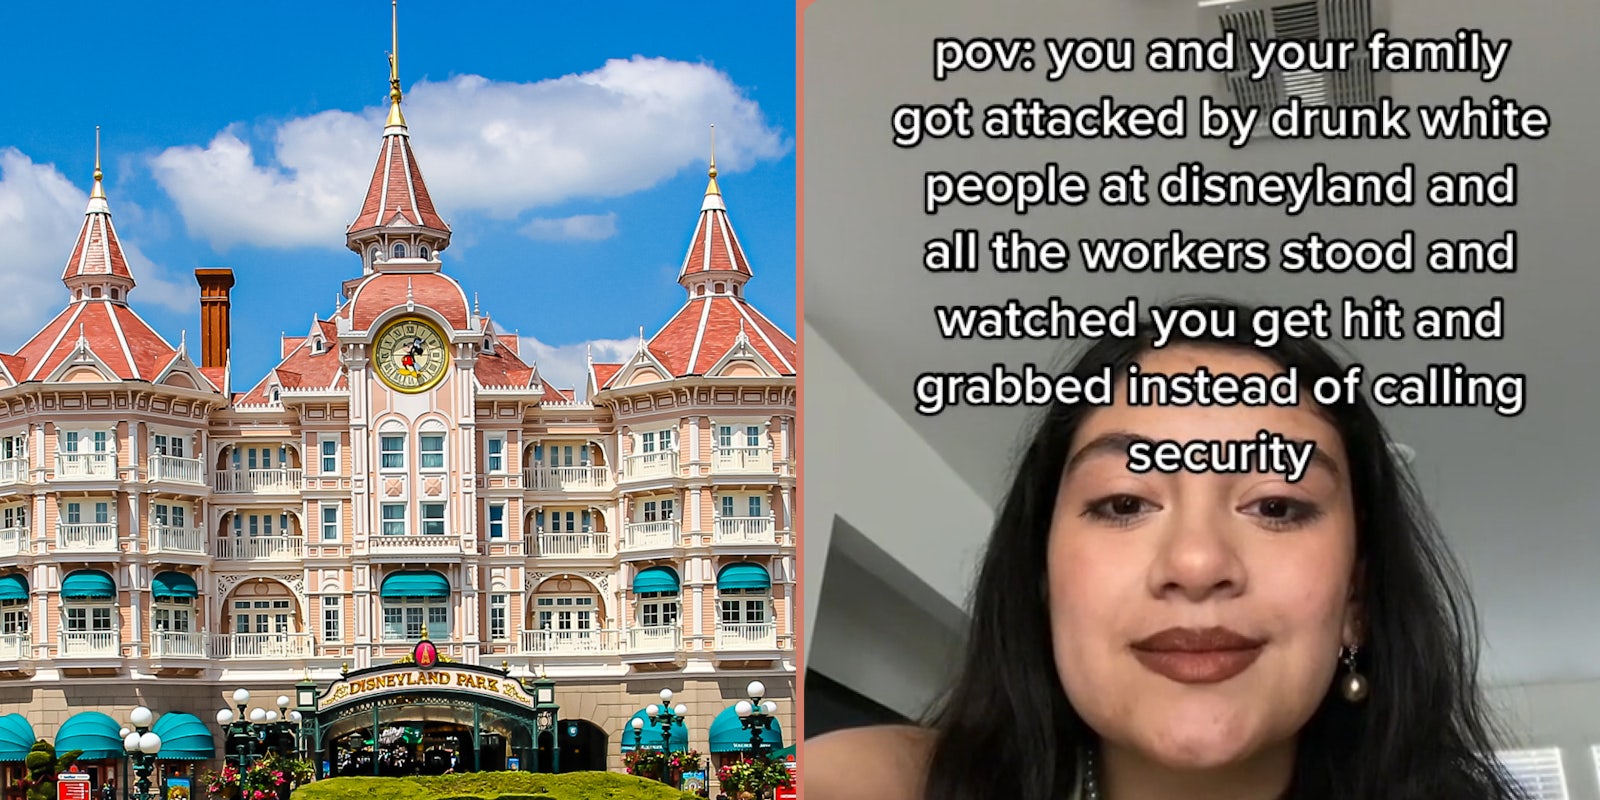 Dinseyland hotel with mickey mouse logo (l) woman in room caption 'pov: you and your family got attacked by drunk white people at disneyland and all the workers stood and watched you get hit and grabbed instead of calling security' (r)